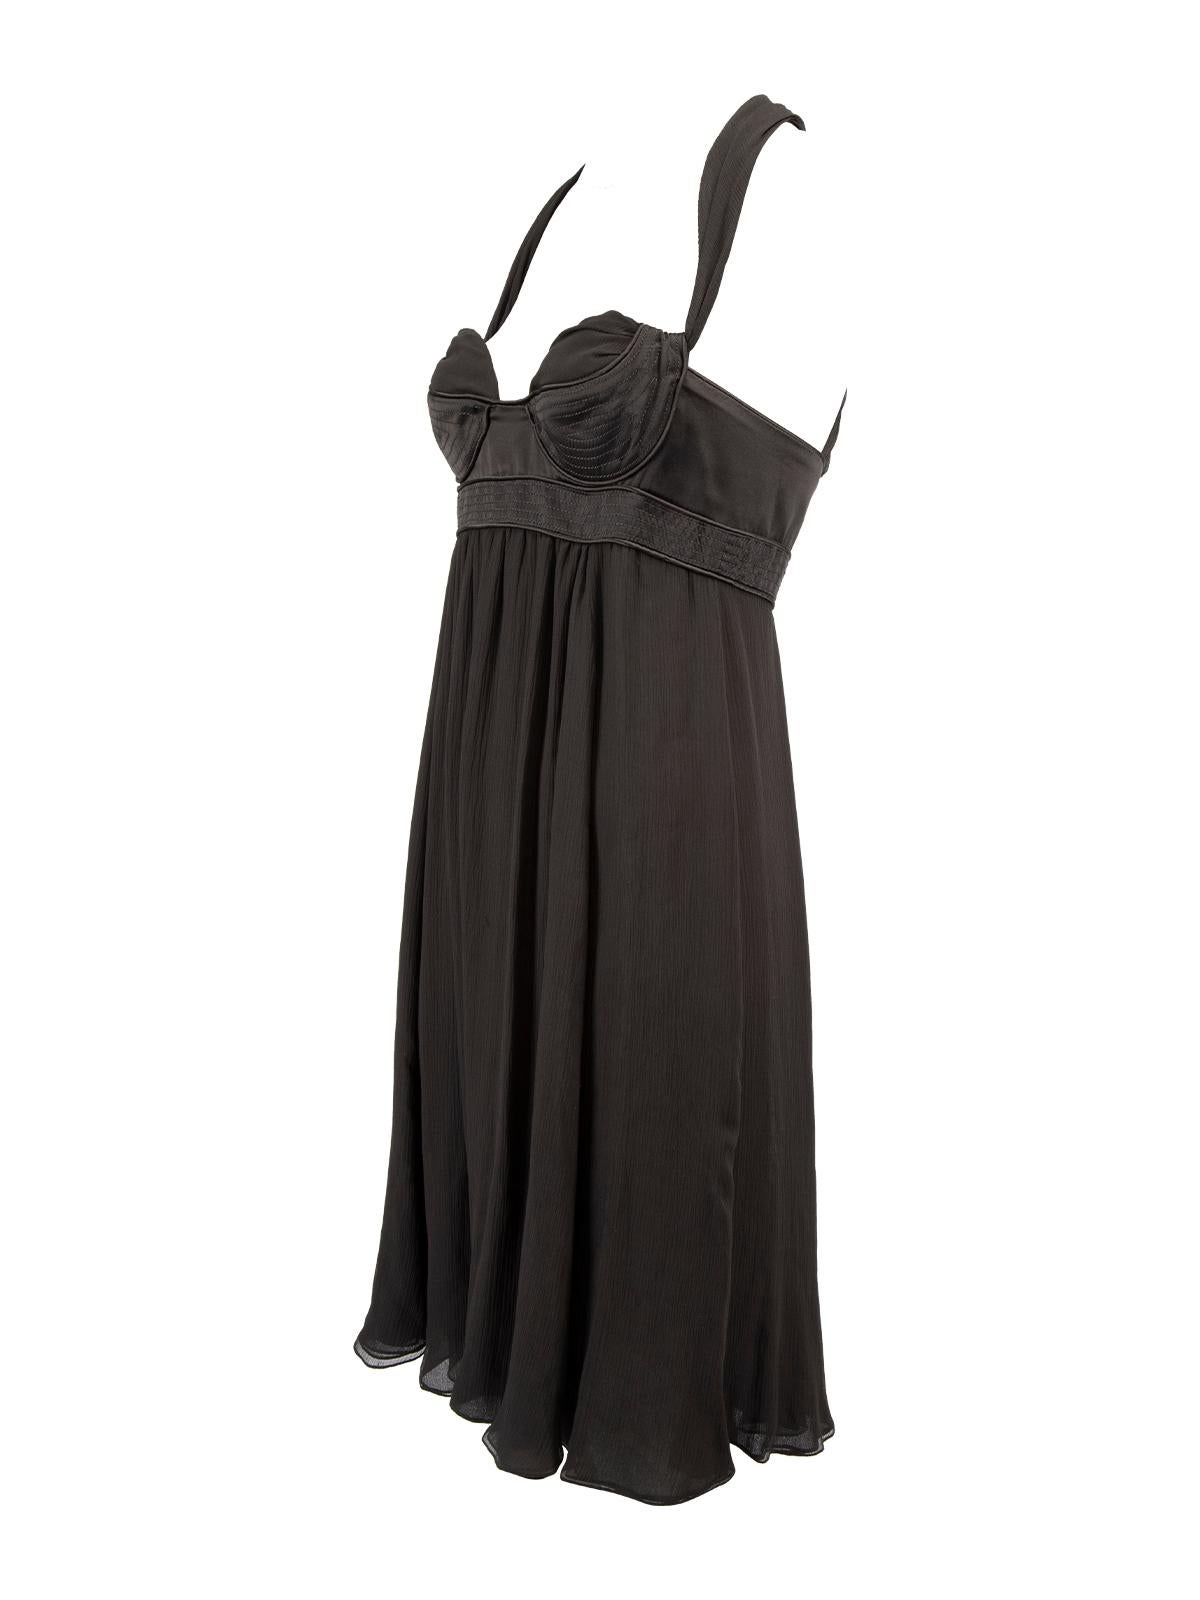 Pre-Loved Proenza Schouler Women's Flowy Dress with Corset In Excellent Condition For Sale In London, GB